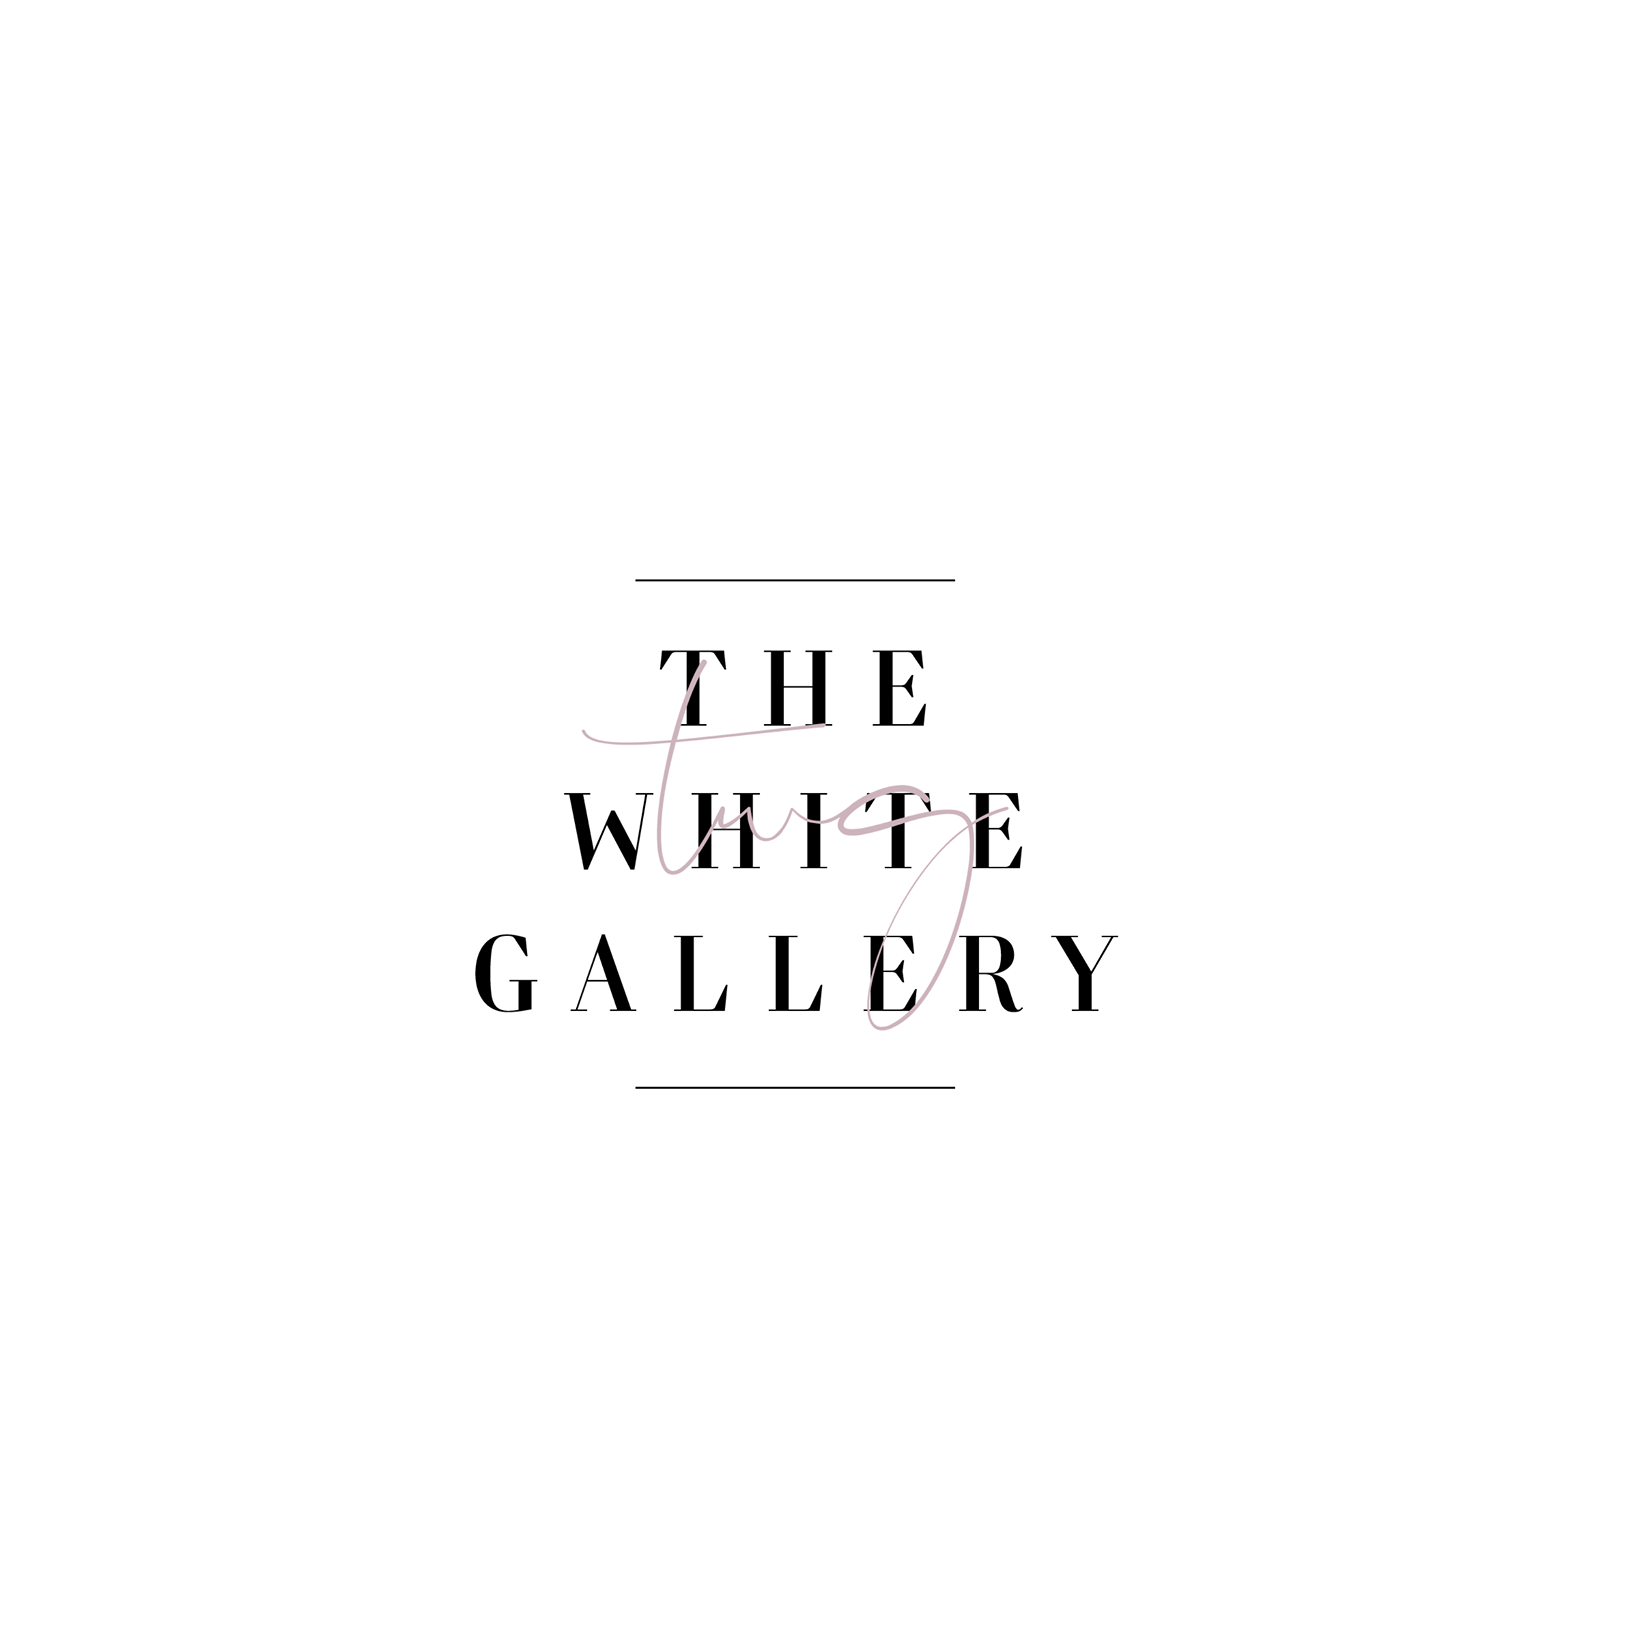 The White Gallery